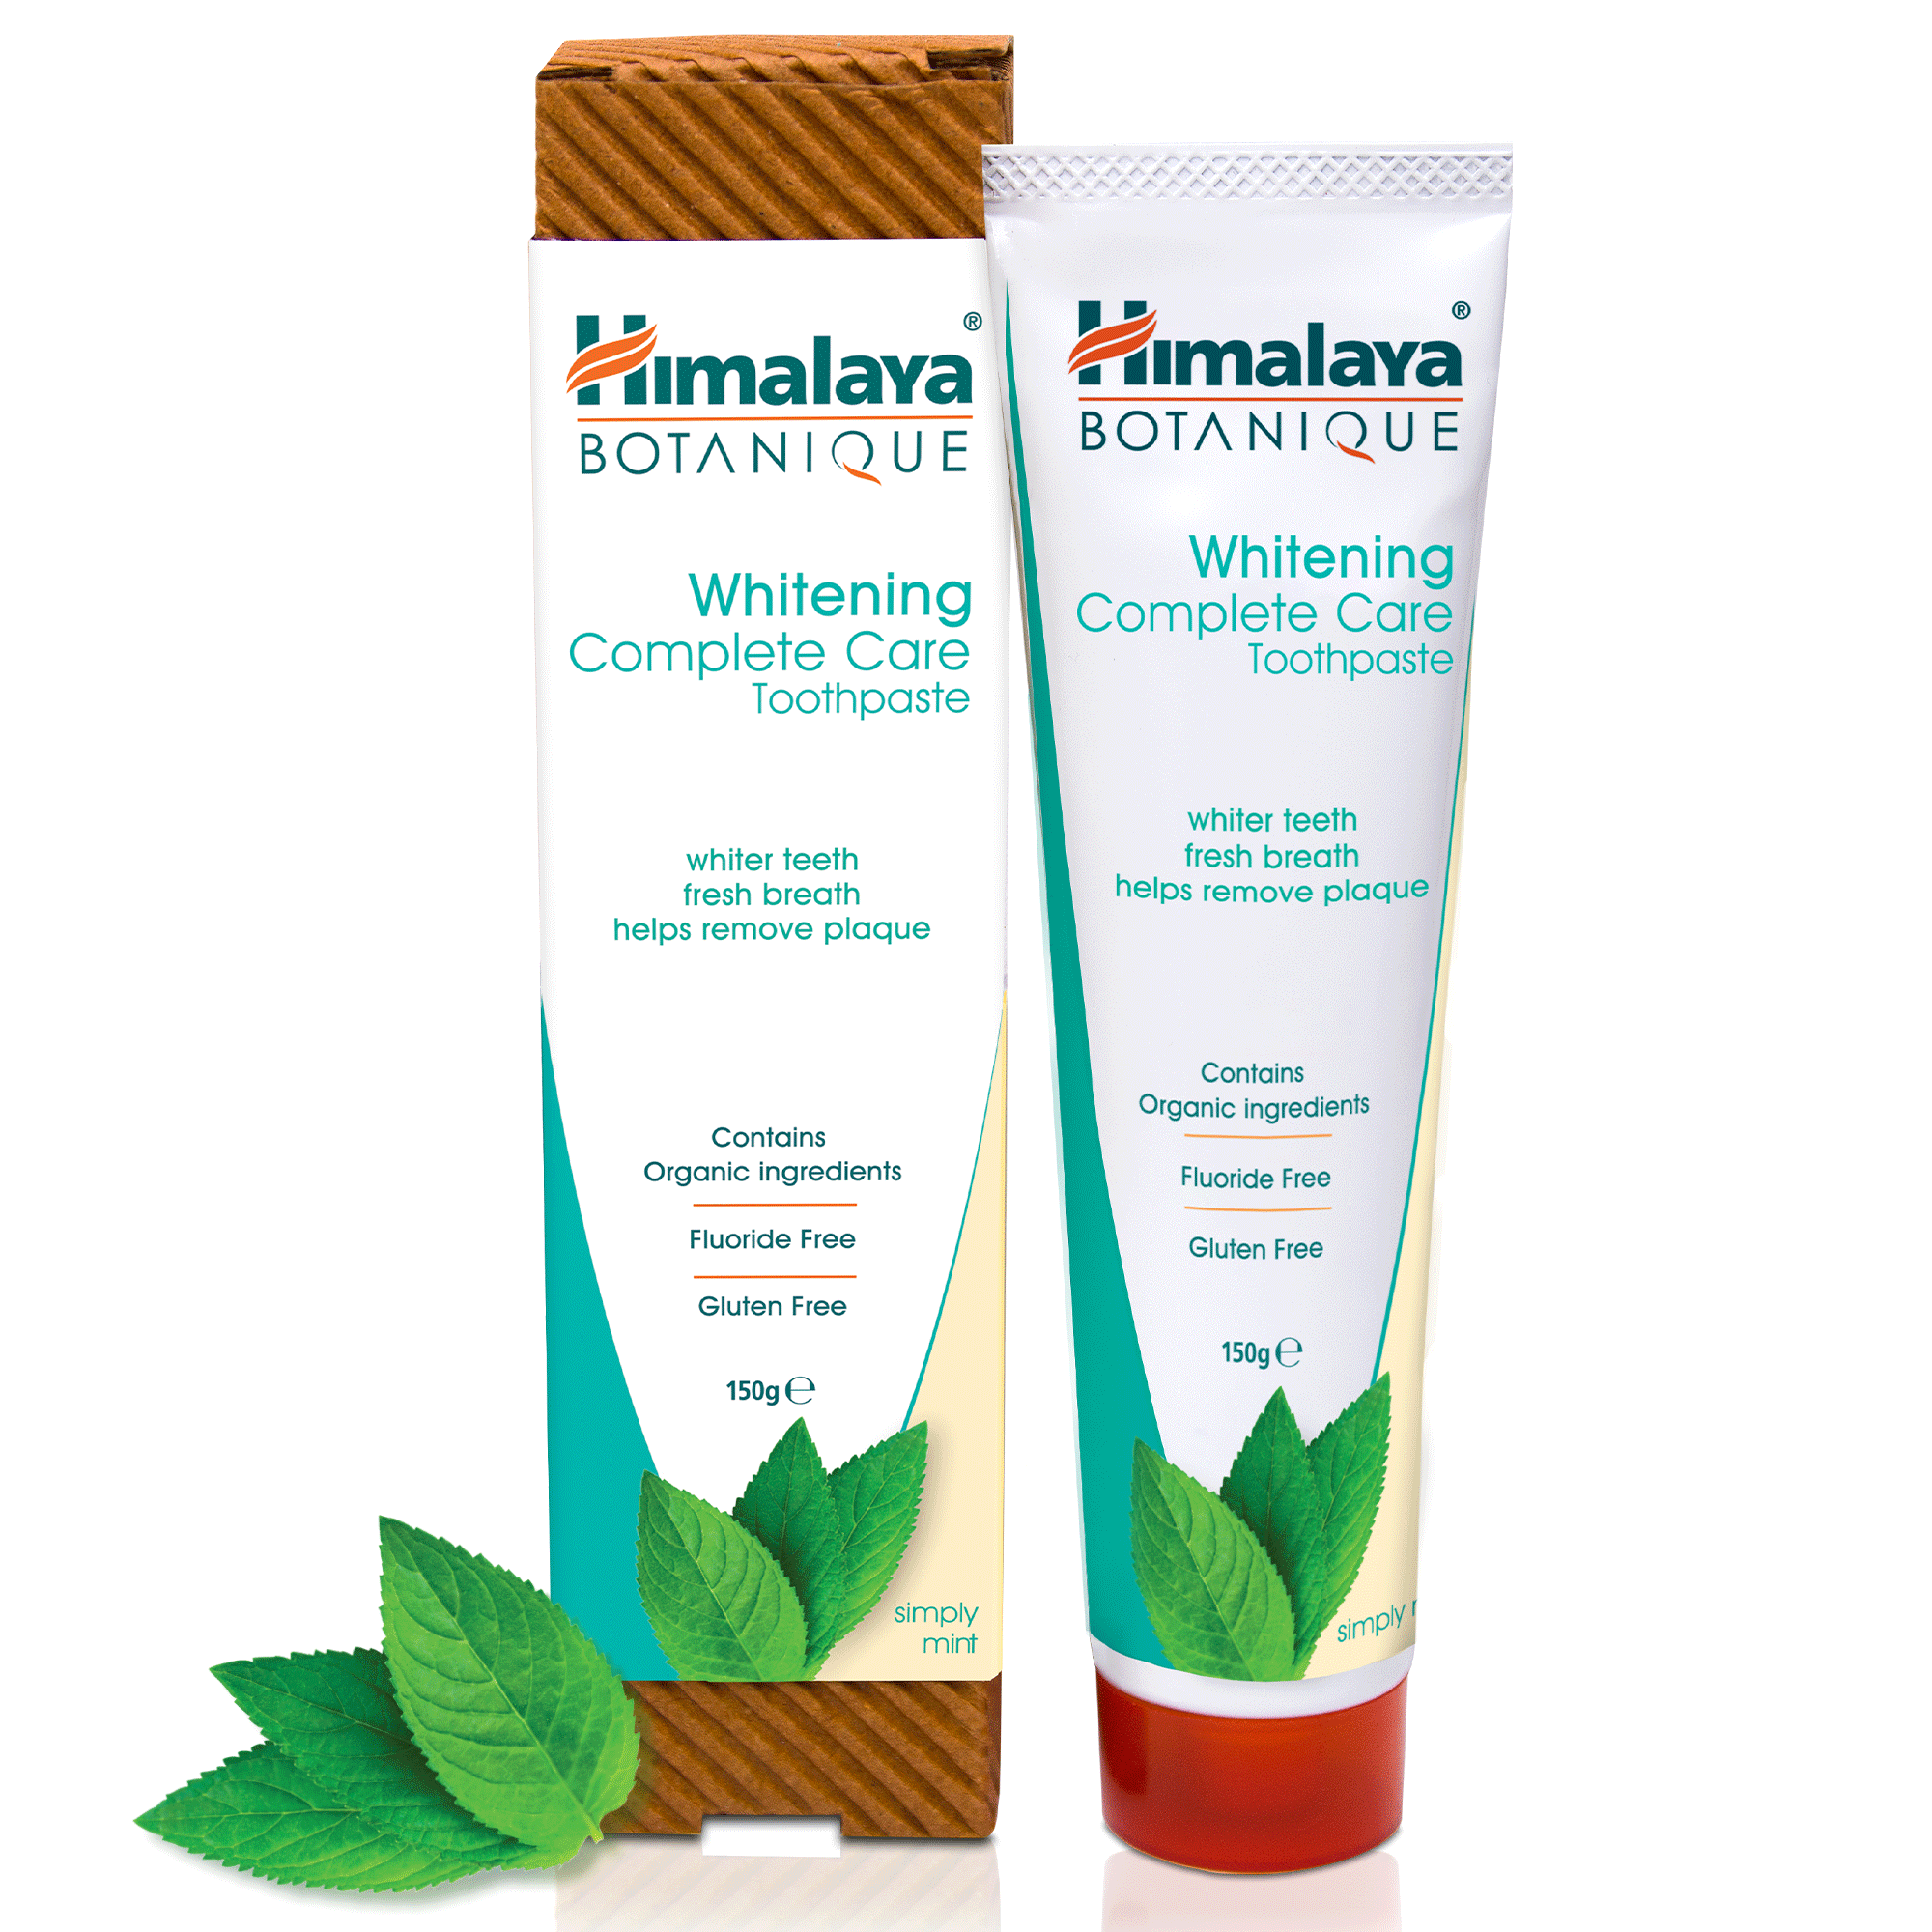 Himalaya BOTANIQUE Whitening Complete Care Toothpaste - Simply Mint